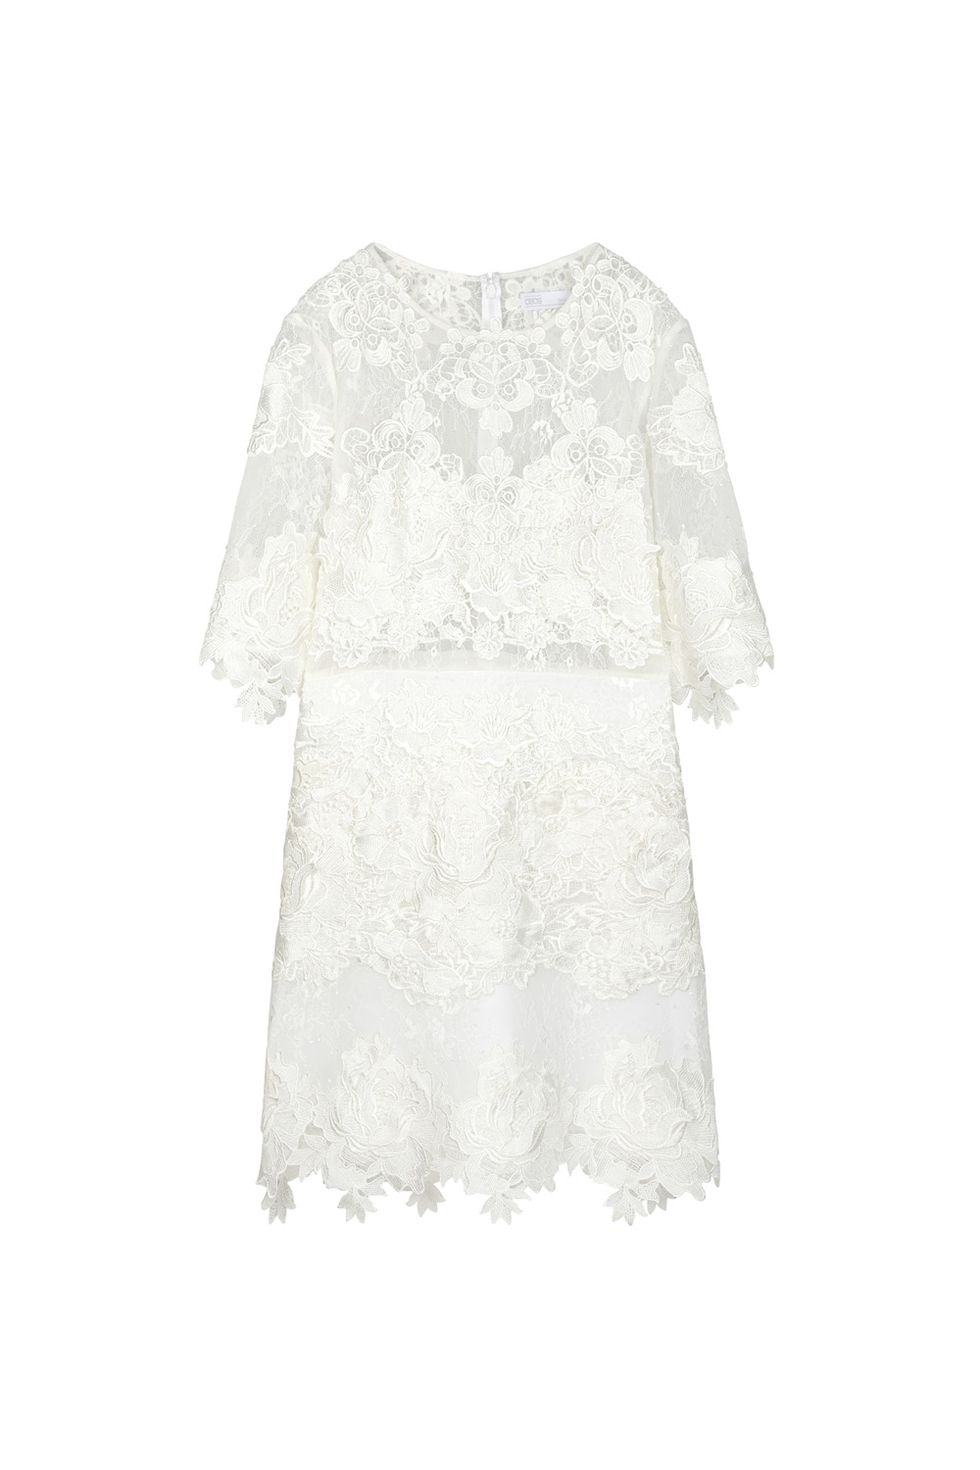 Clothing, White, Lace, Dress, Sleeve, Blouse, Outerwear, Day dress, Top, Cocktail dress, 